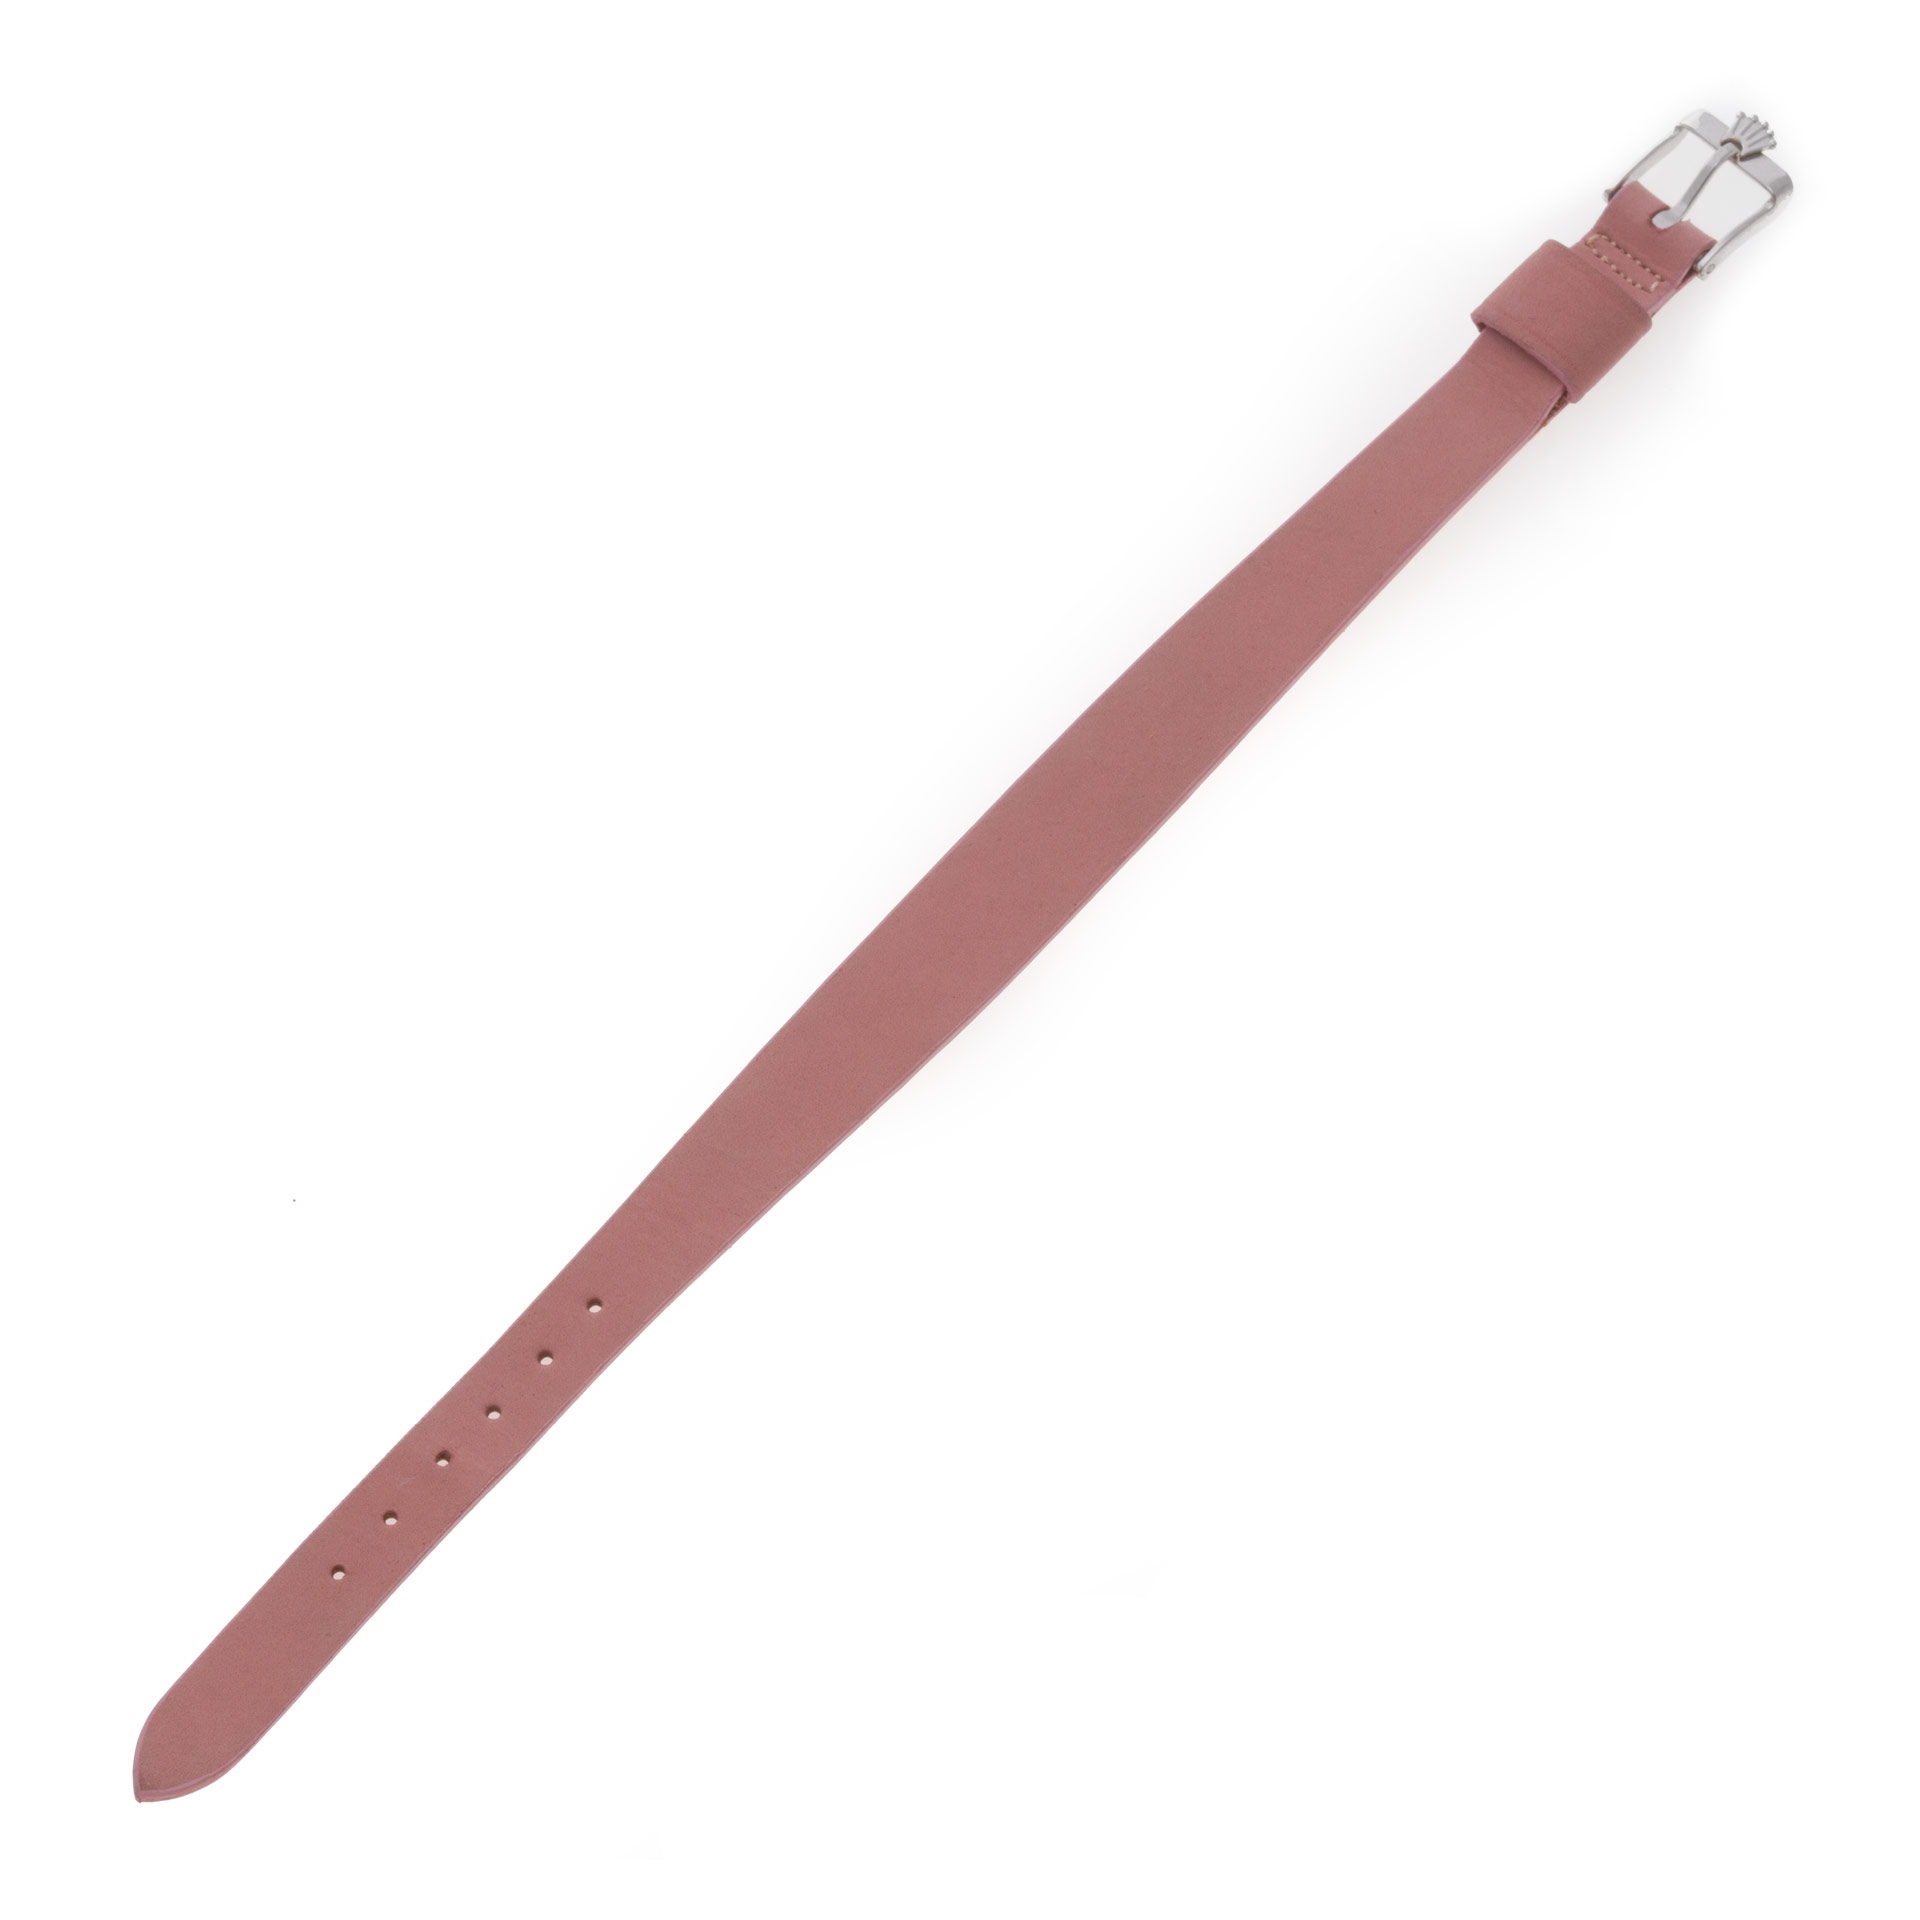 Rolex pink leather strap (8.5 x 12mm)